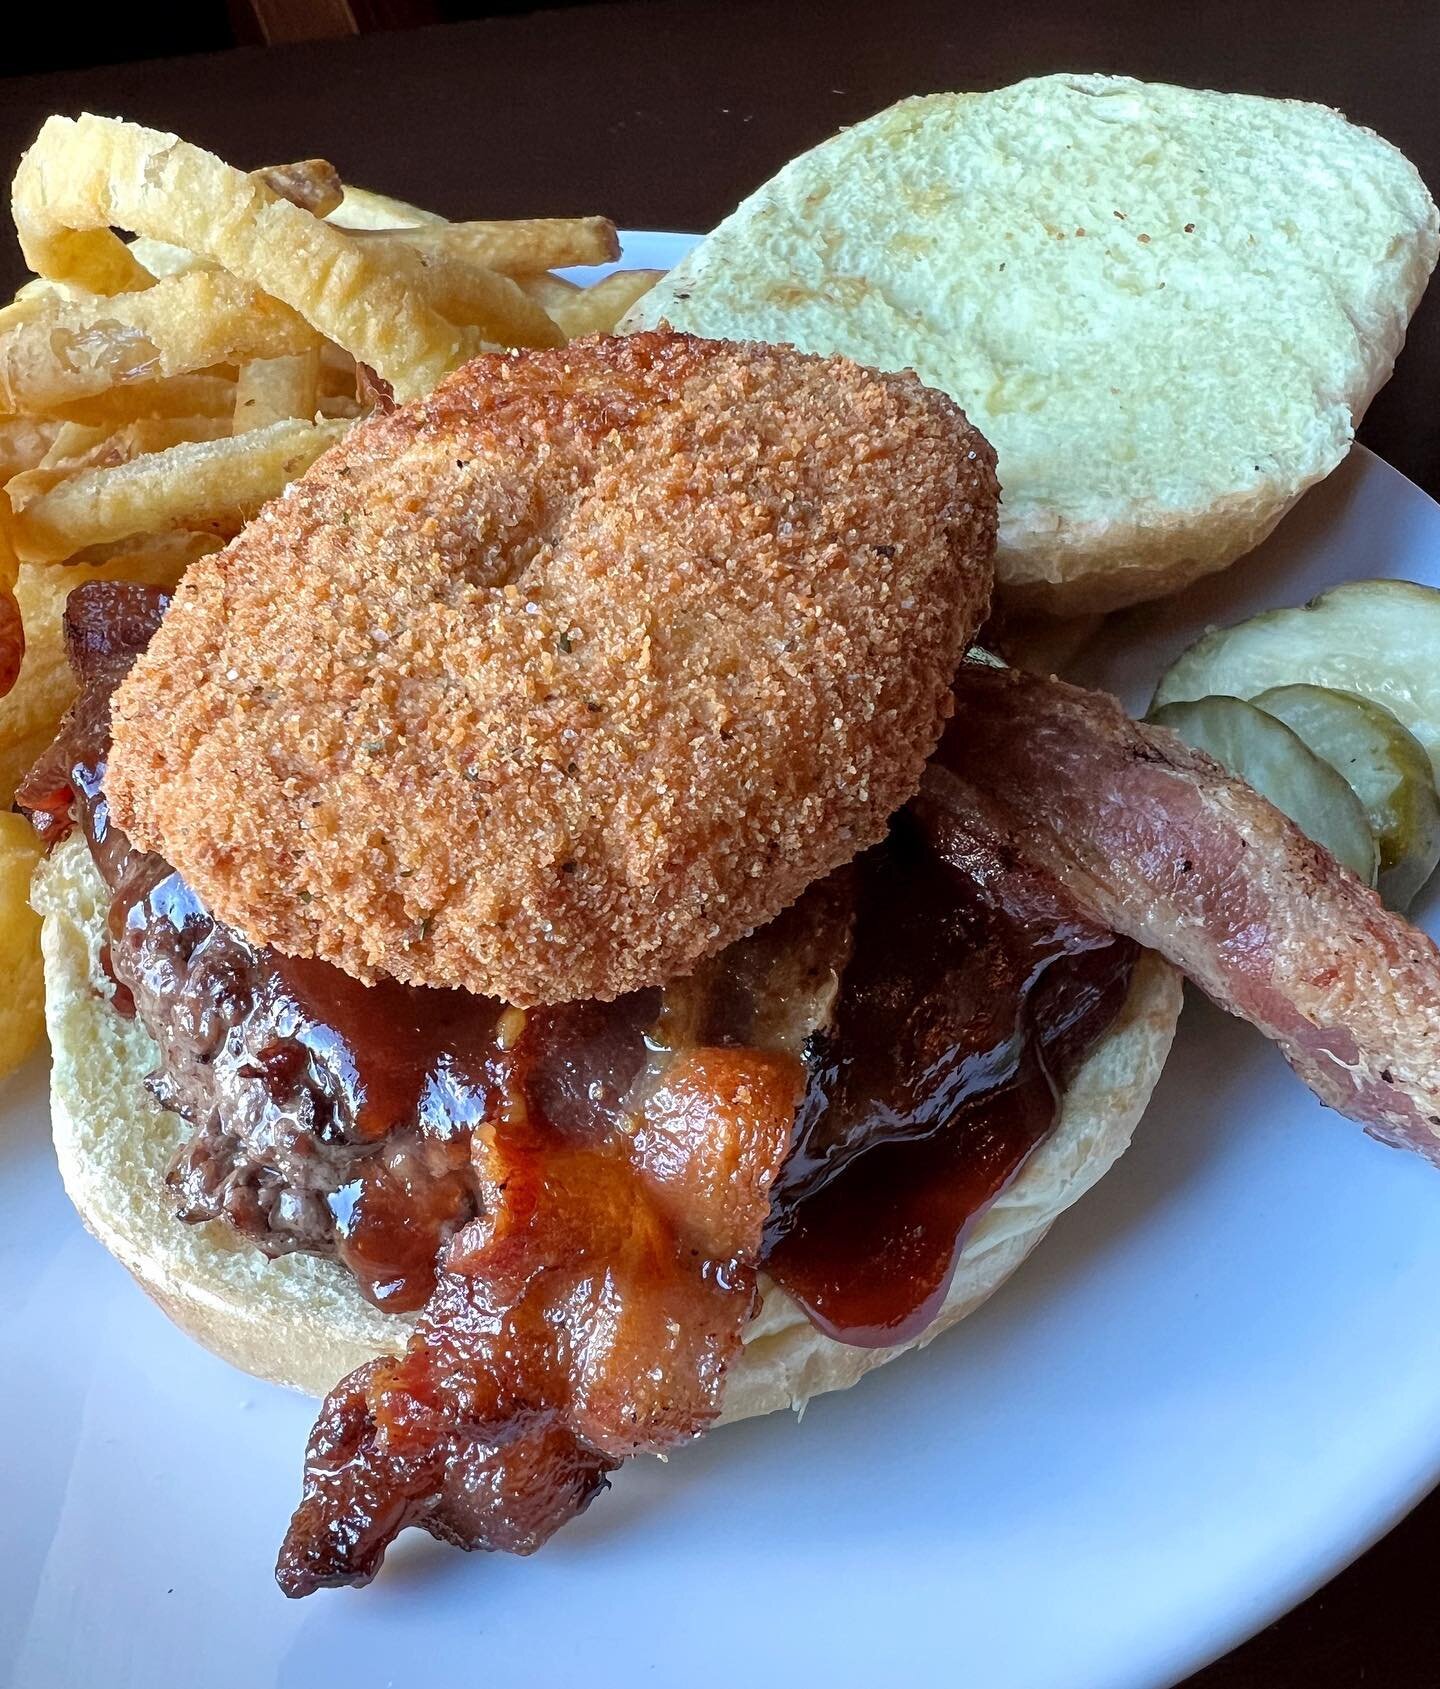 We love our mozzarella moons so much we put &lsquo;em on a burger 😉🤤 on the specials this week THE DONLON BURGER hand pressed burger topped with a fried mozzarella moon, bacon and bbq sauce